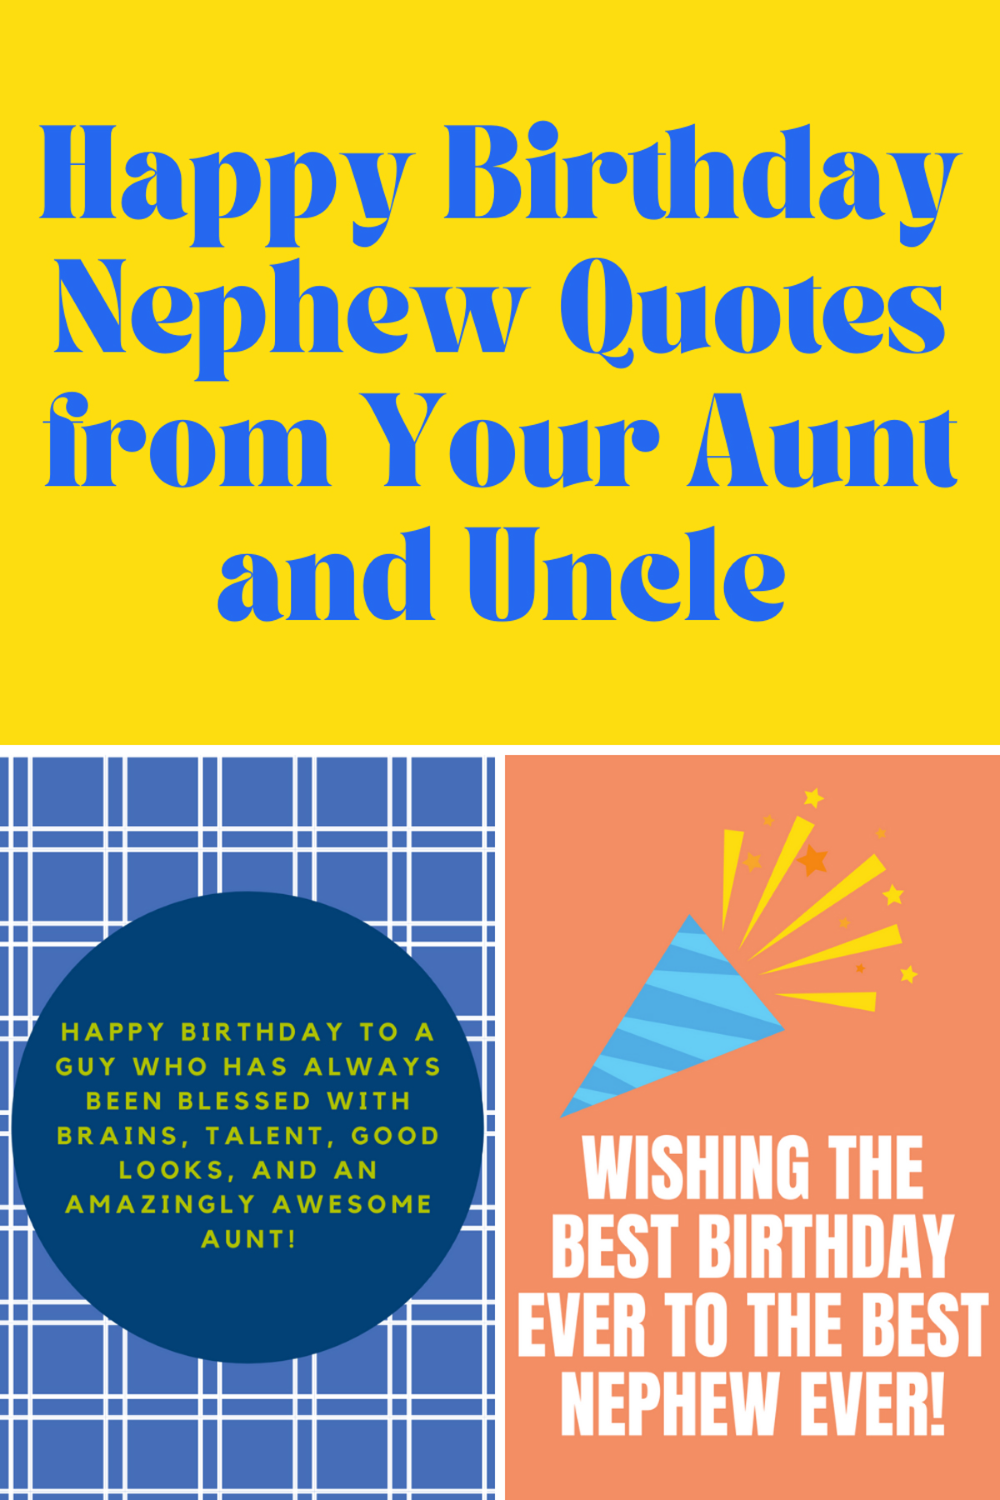 47 {NEW} Happy Birthday Nephew Quotes from Your Aunt & Uncle - Darling Quote